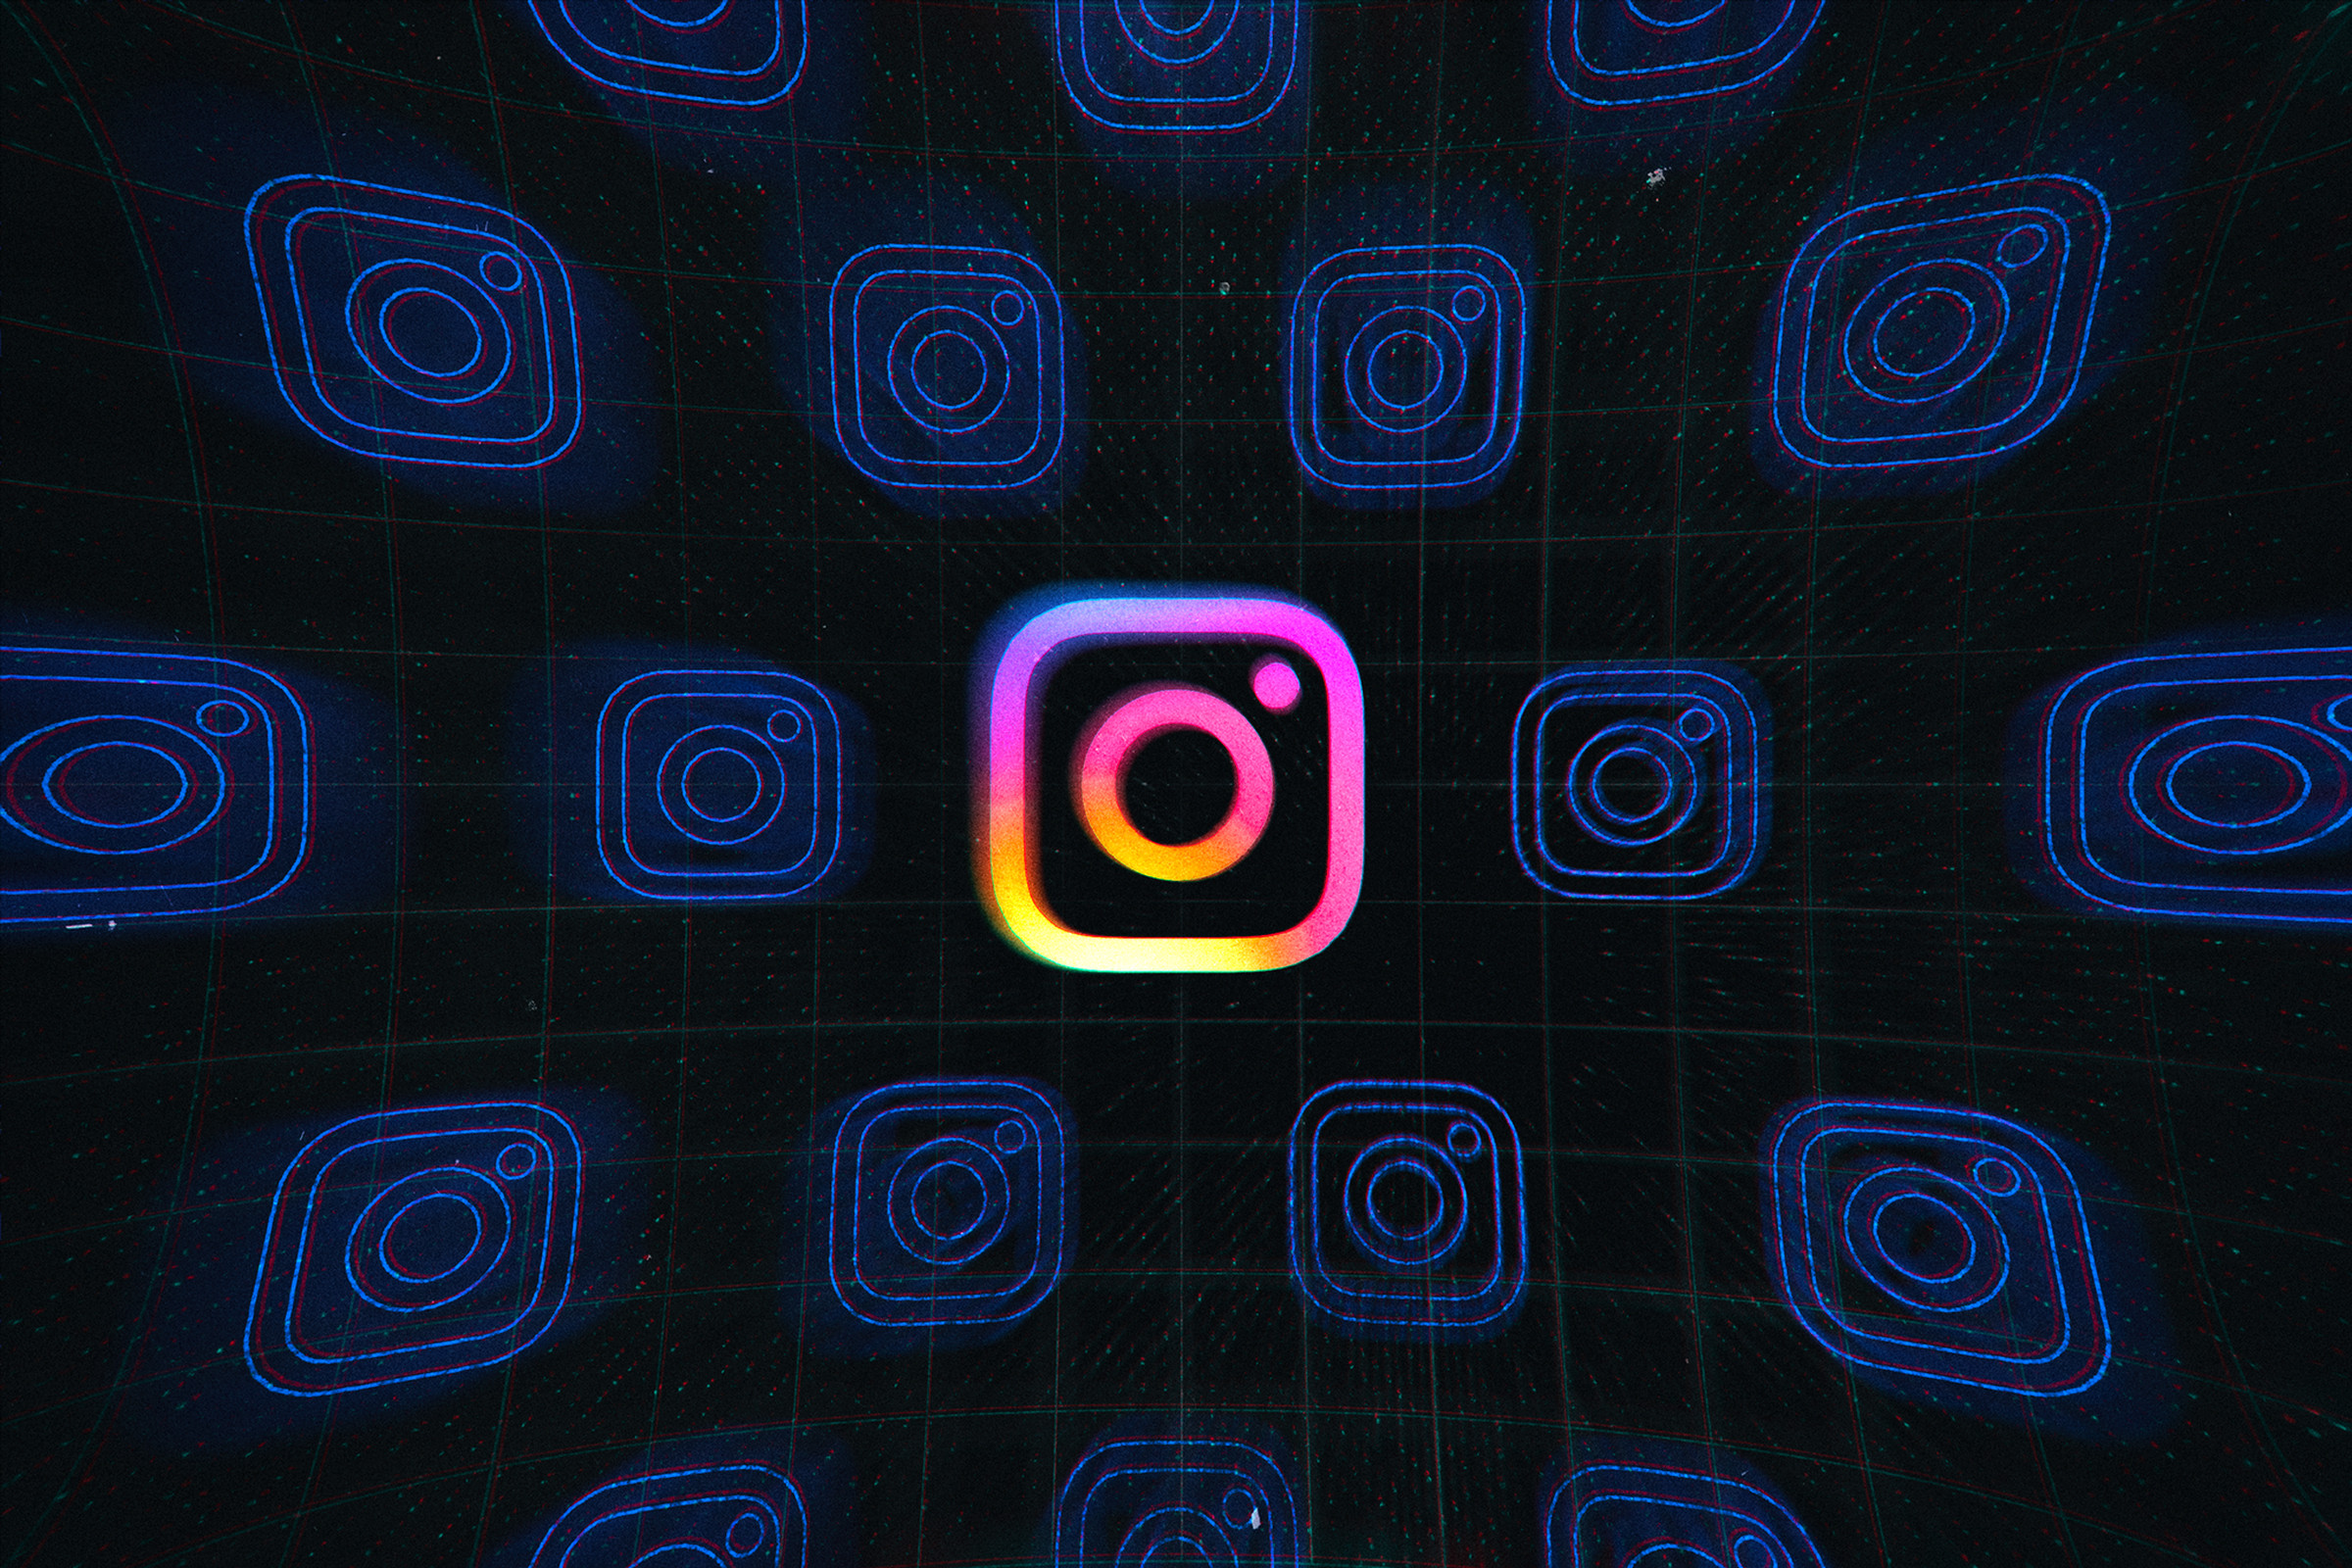 Instagram to introduce new features to nudge teams away from harmful content